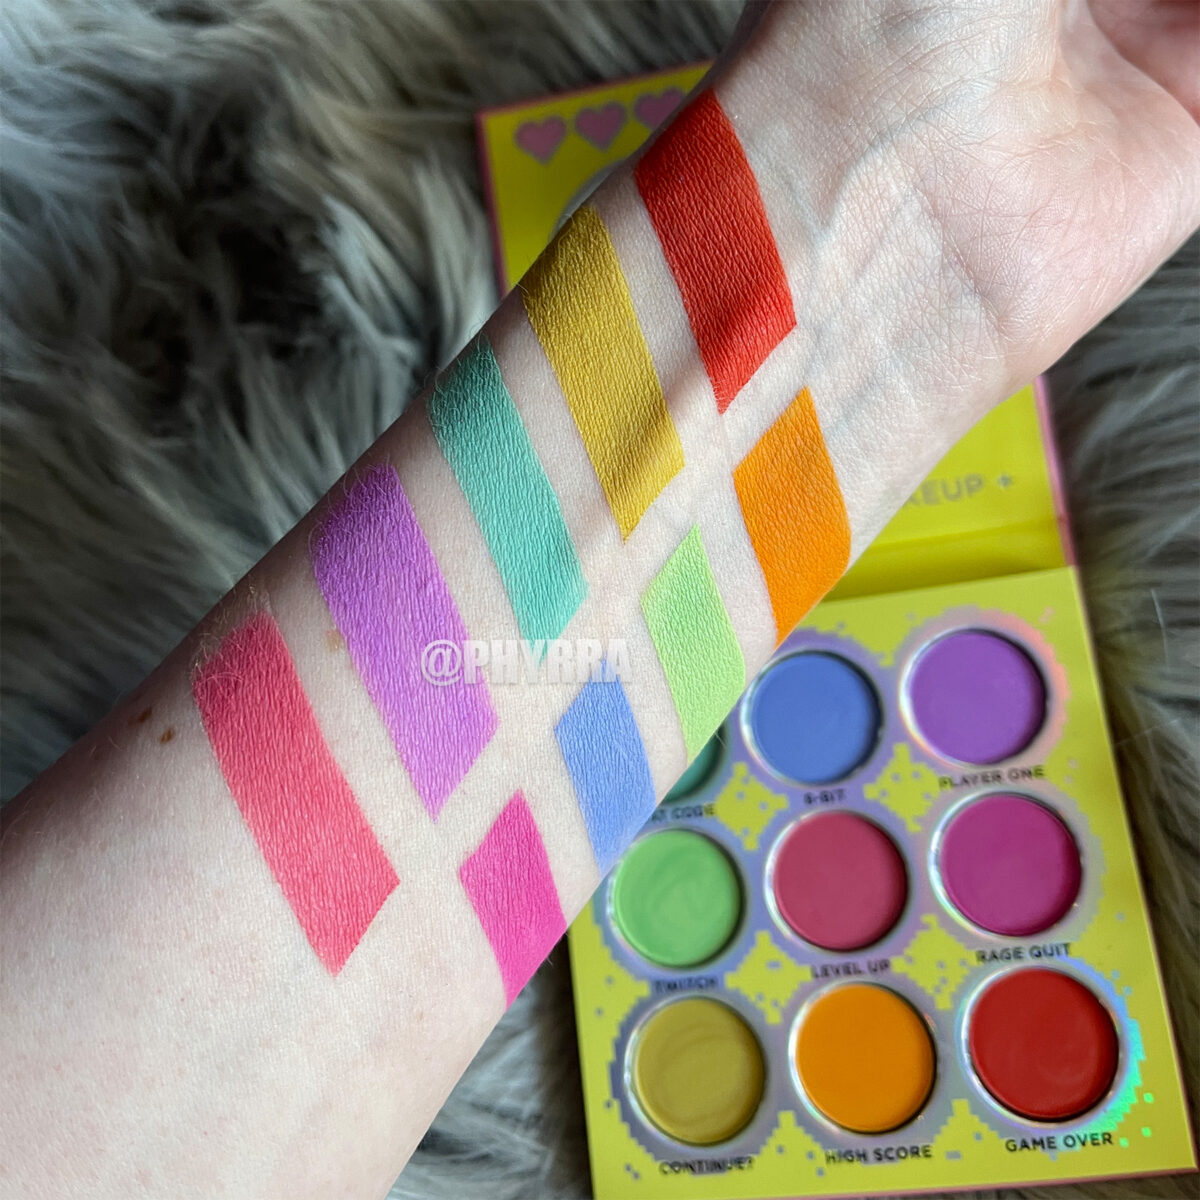 Sugarpill Fun Size Palette Review and Swatches